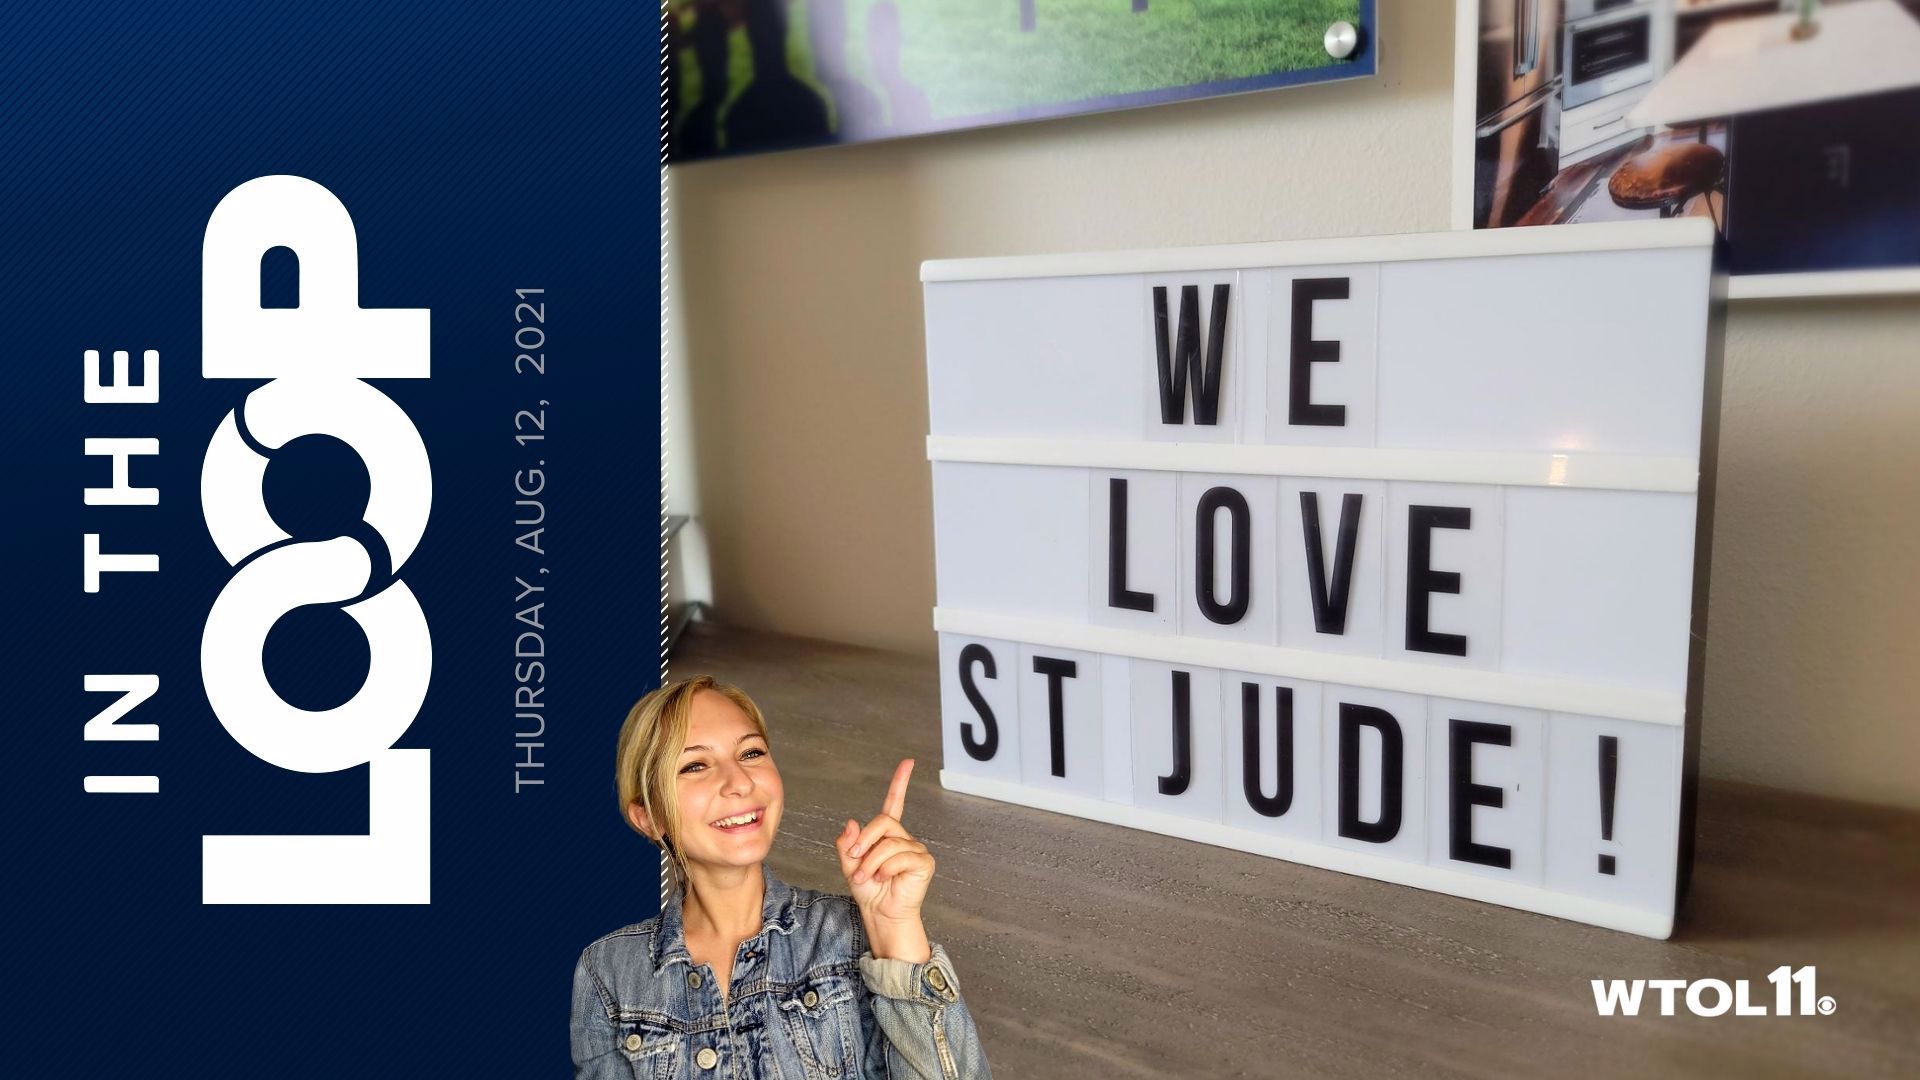 Thursday was the big dream home giveaway to benefit St. Jude Children's Research Hospital! Here's a look at the mission of St. Jude and where your money goes.